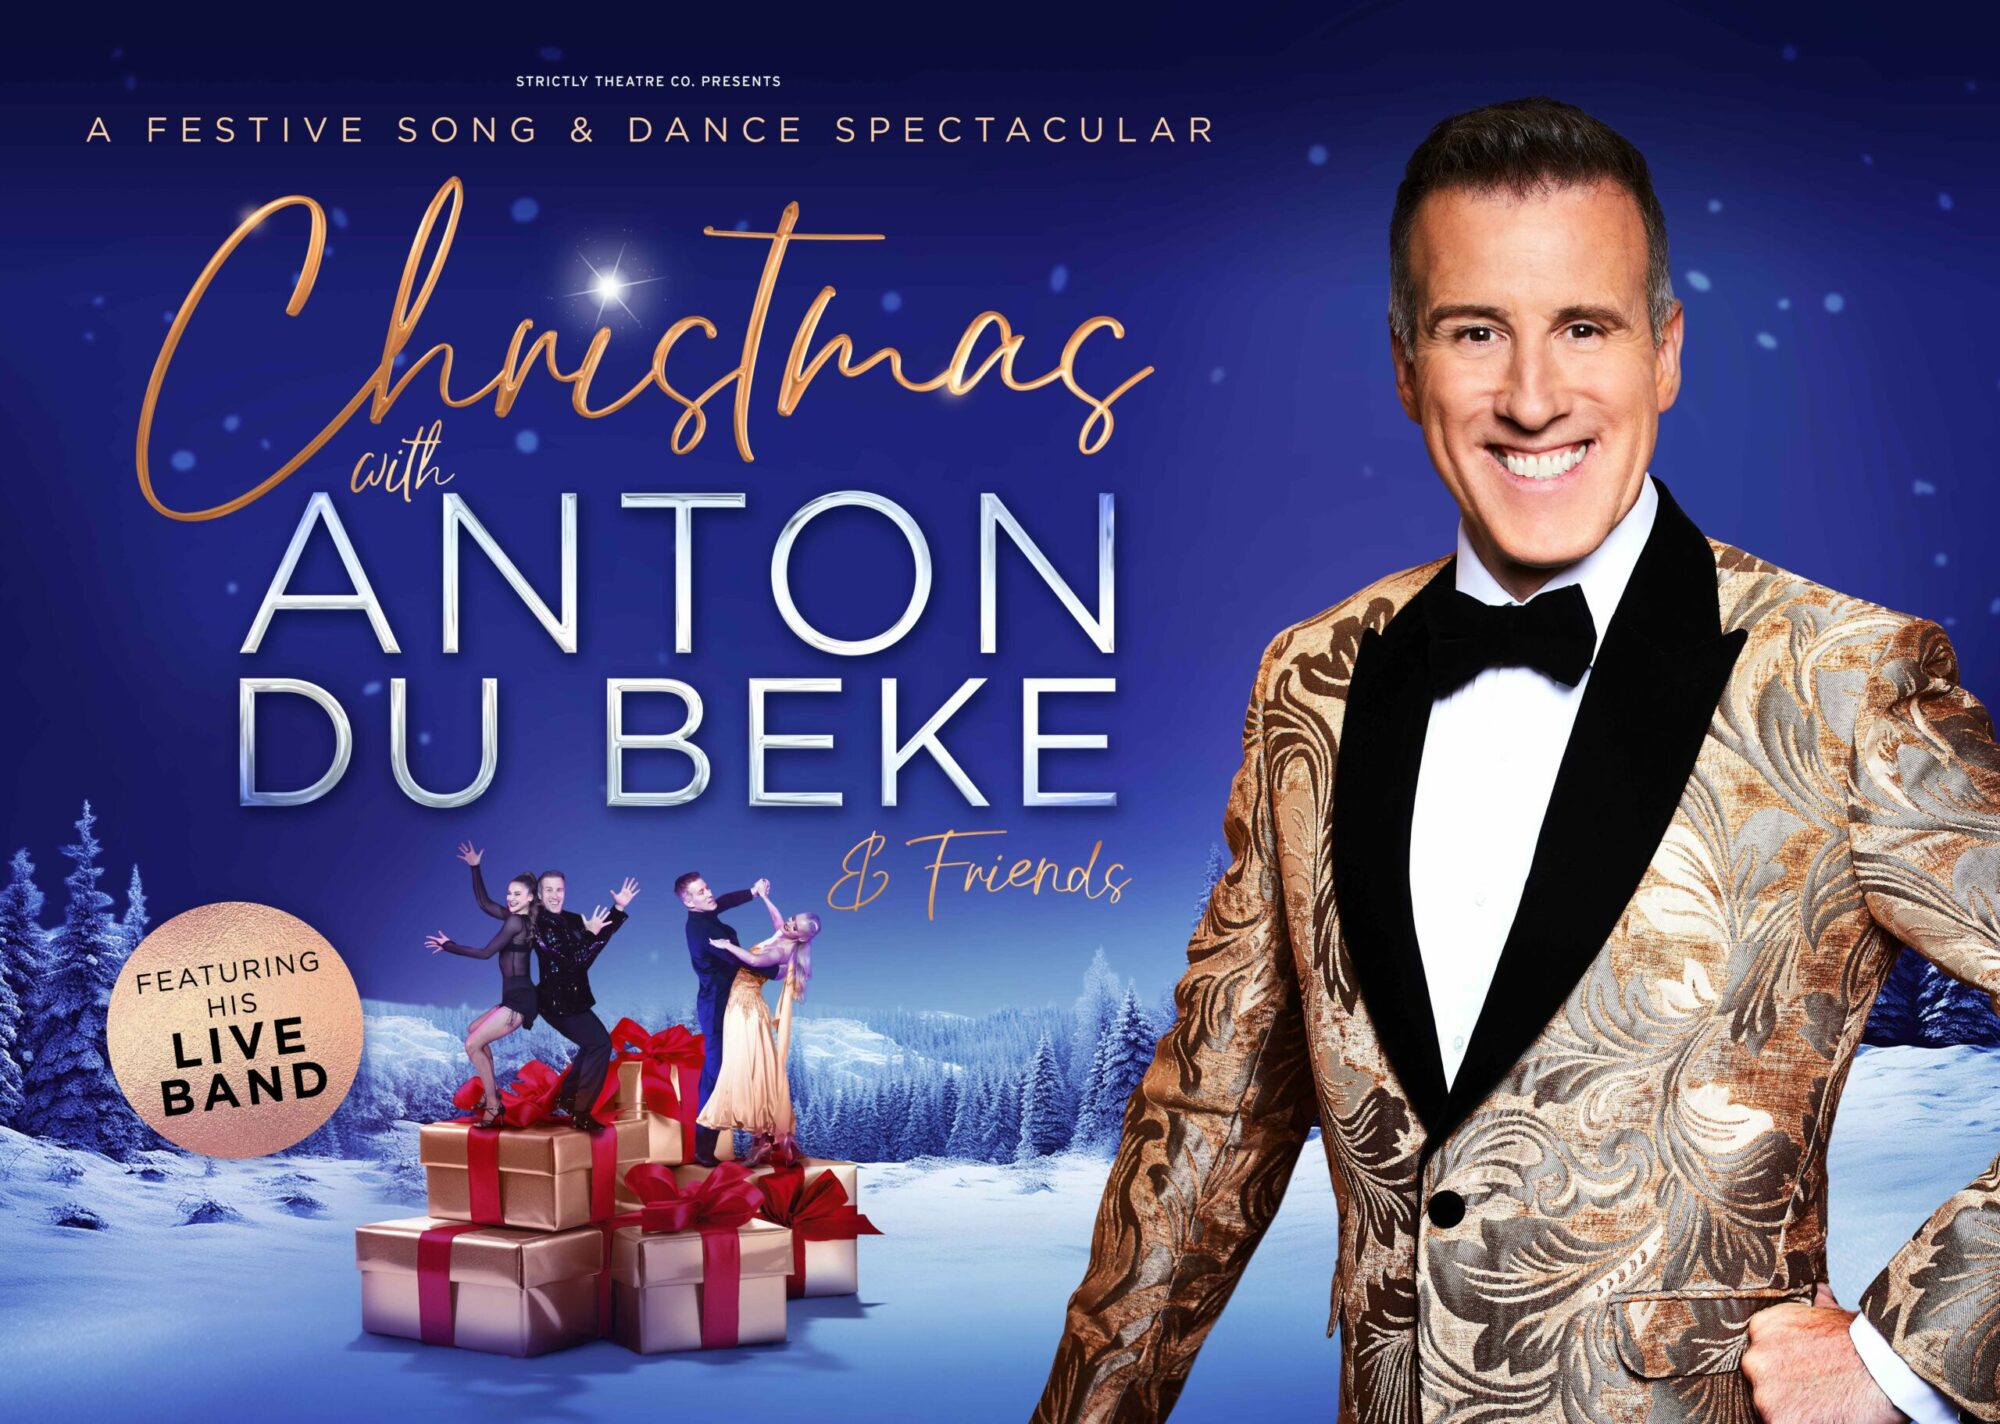 Image name Christmas with Anton Du Beke at York Barbican York scaled the 24 image from the post Christmas with Anton Du Beke at York Barbican, York in Yorkshire.com.